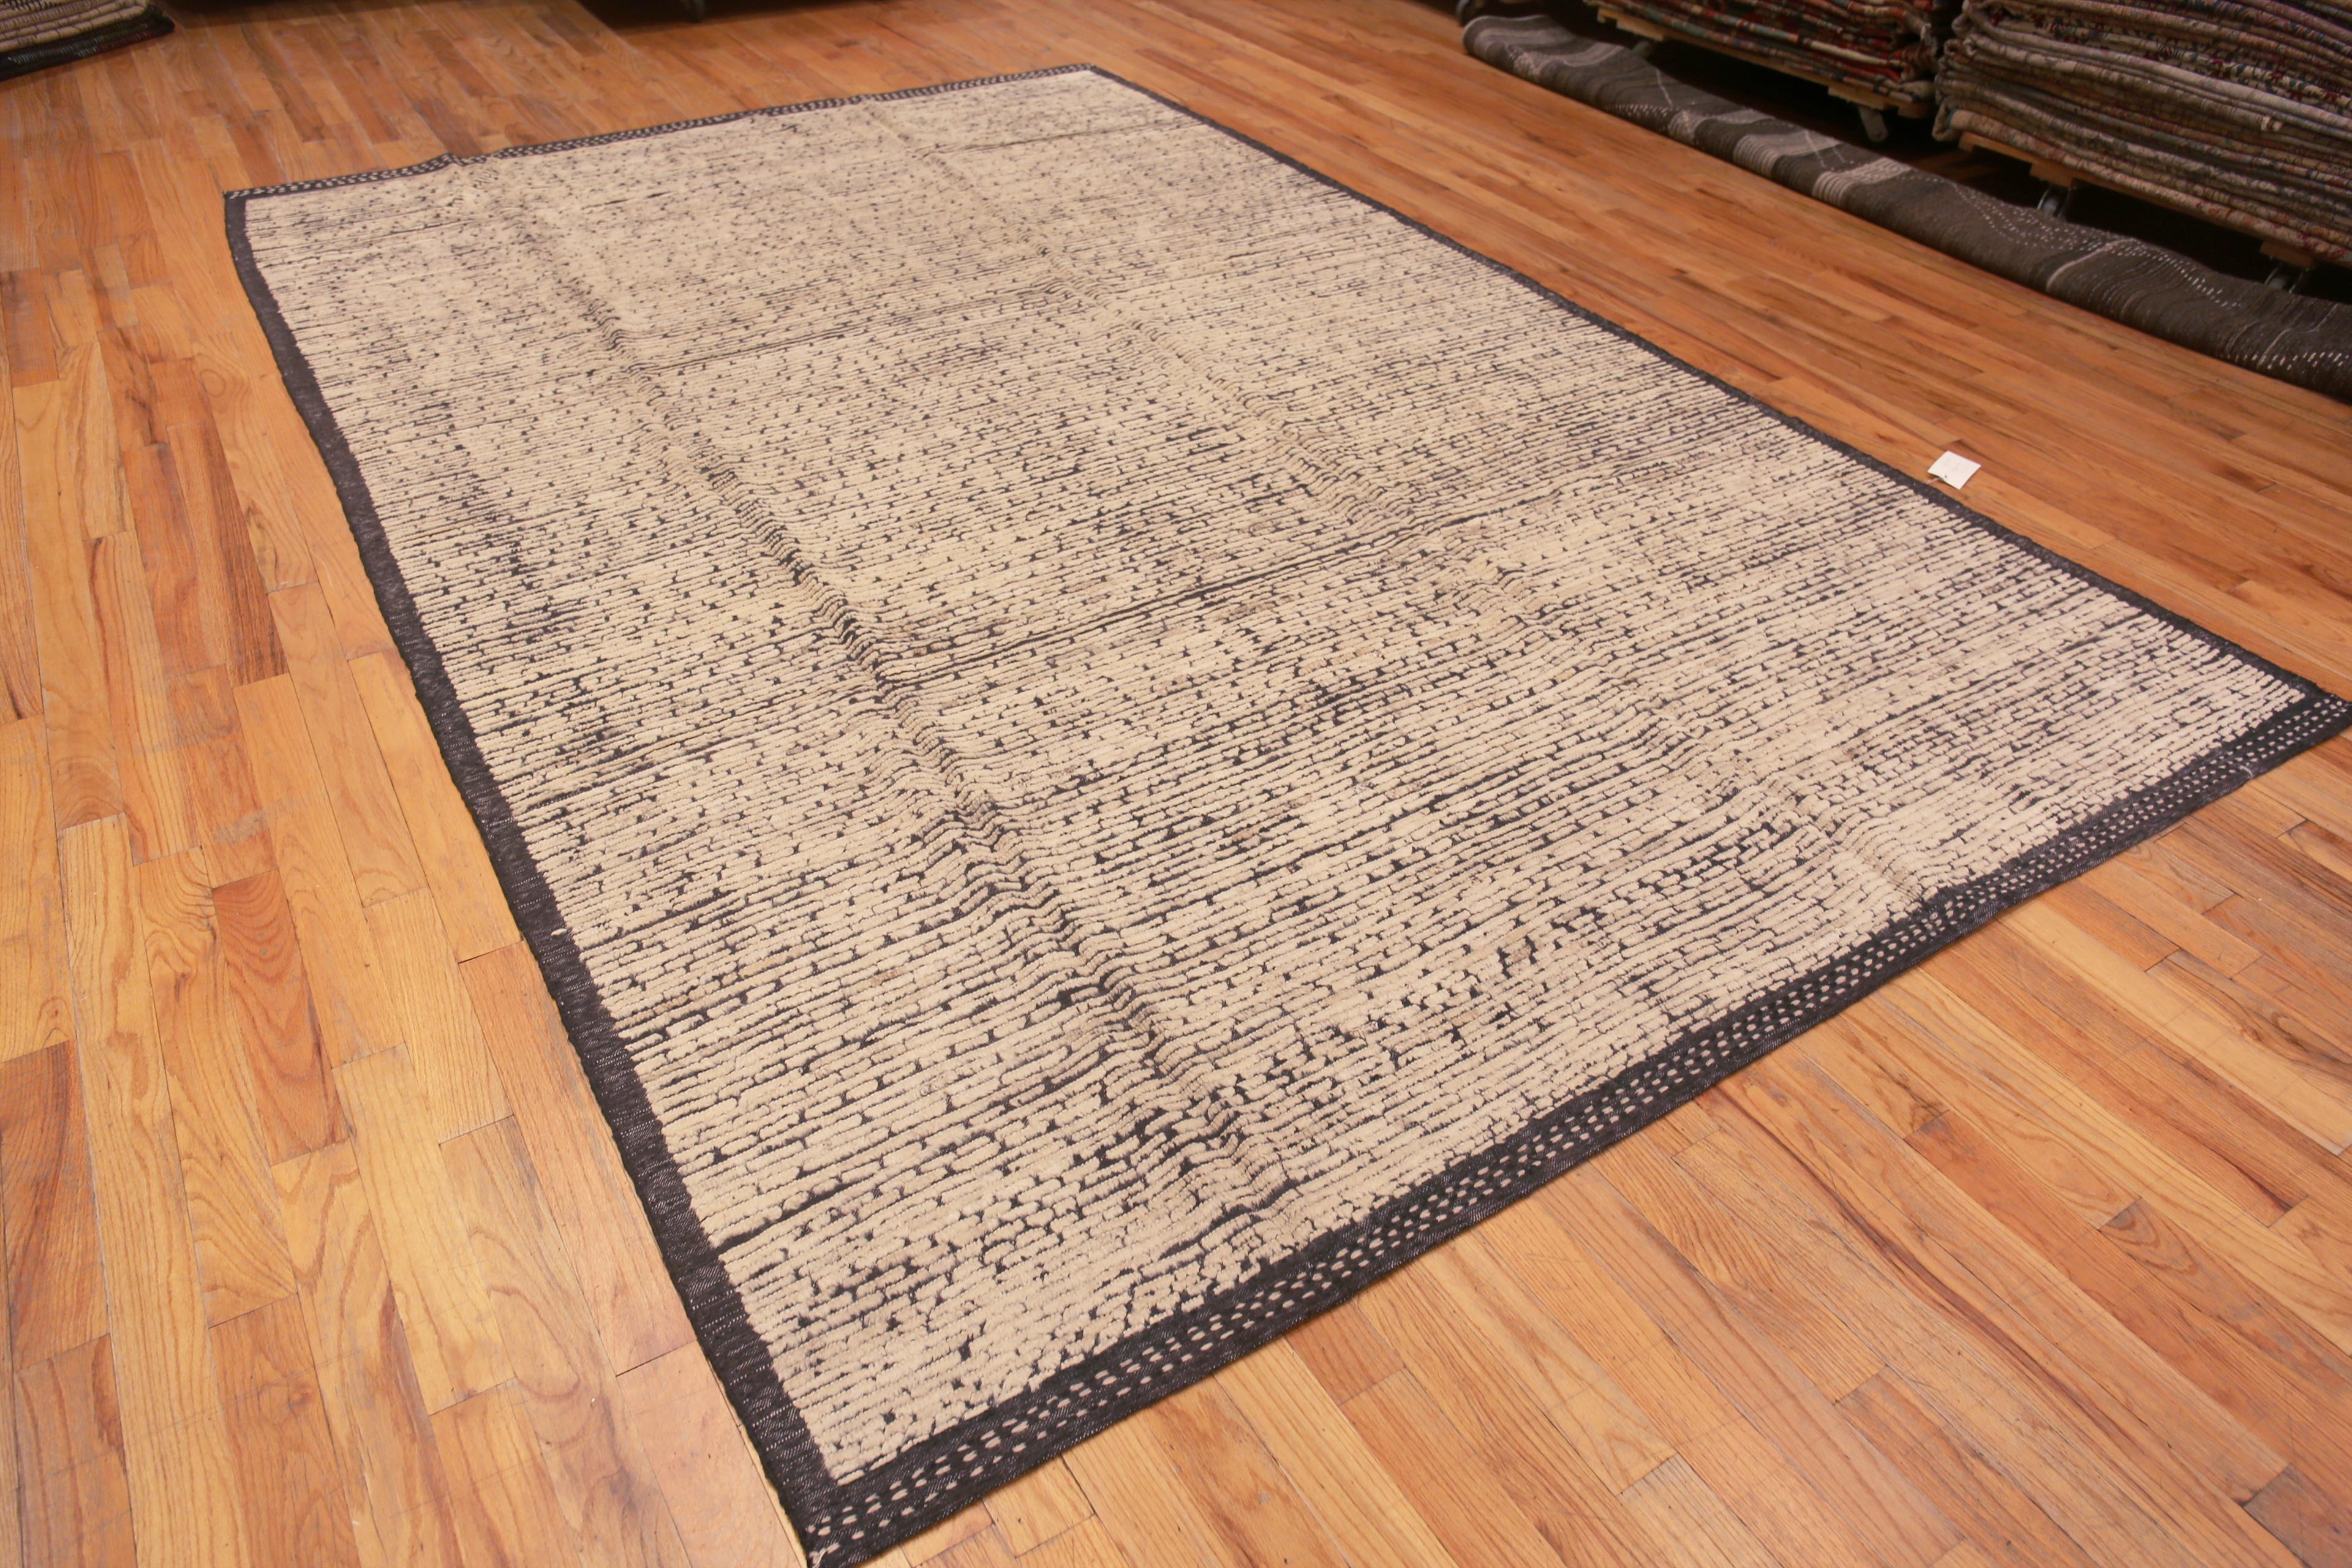 An Artistic and Decorative Salt and Pepper Color Speckled Pattern Modern Room Size Area Rug, Country of Origin: Central Asia, Circa Date: Modern Rug 